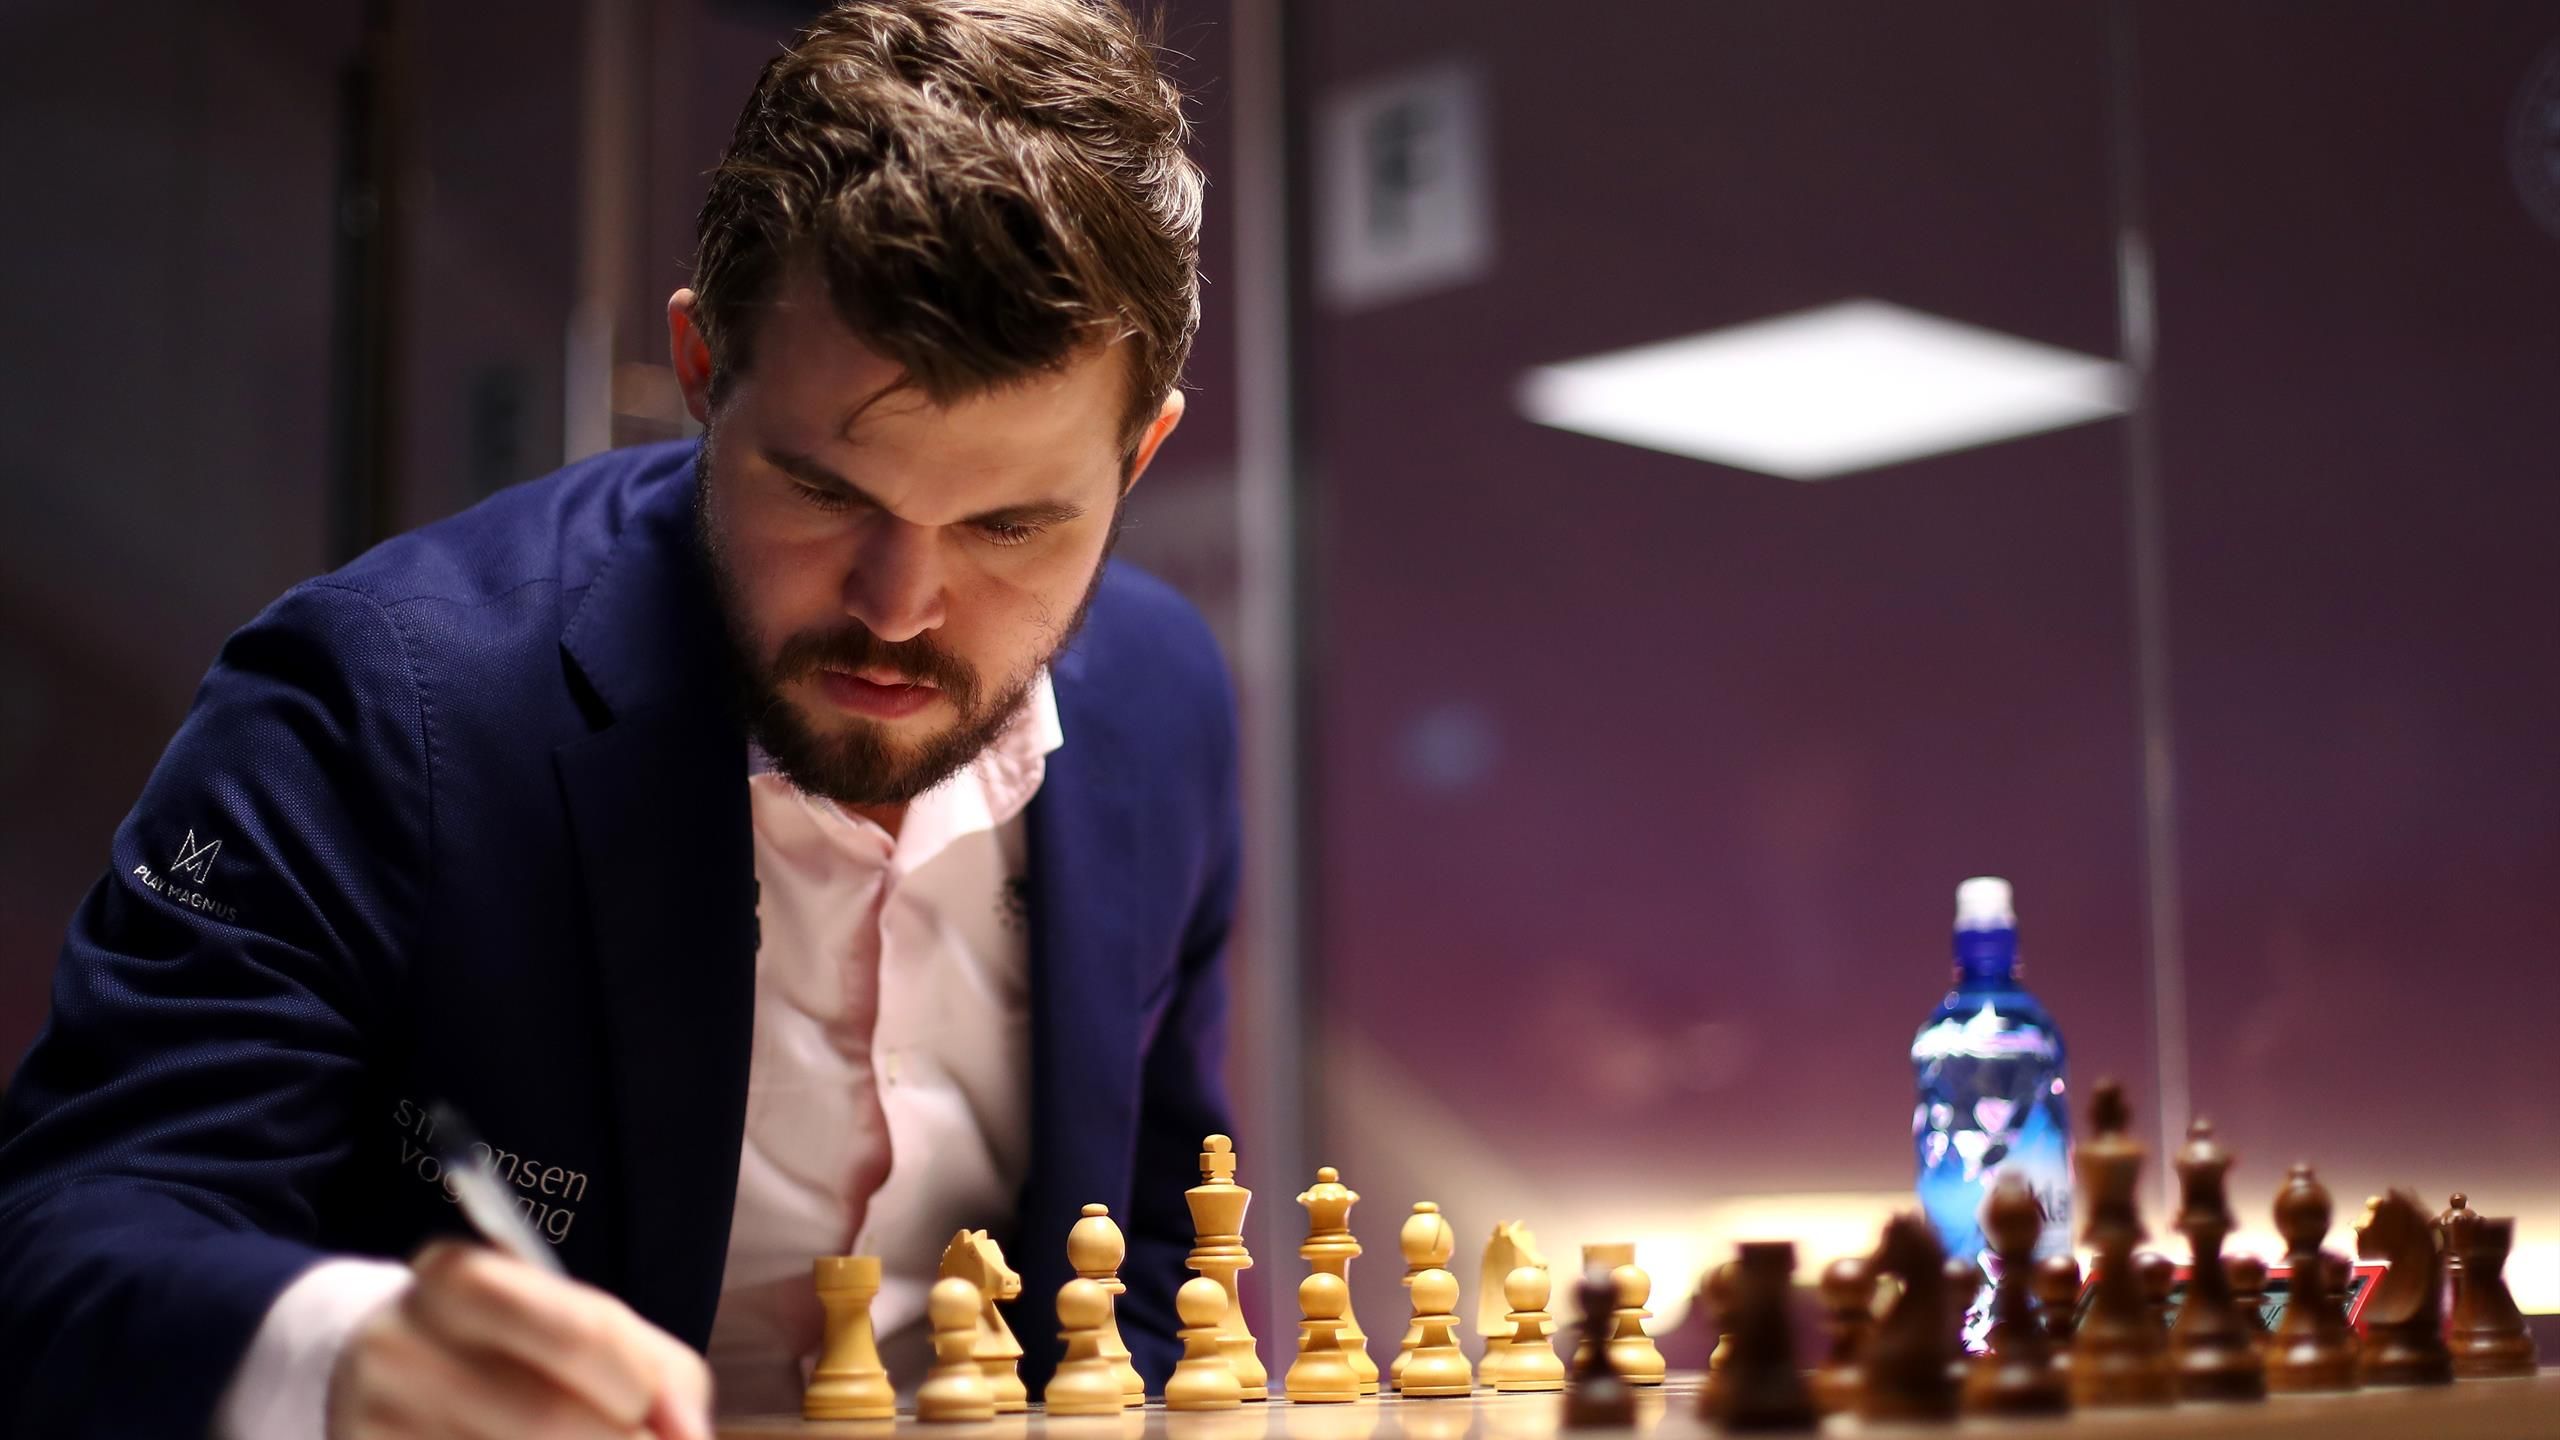 Champions Chess Tour: Chessable Masters, Day 6